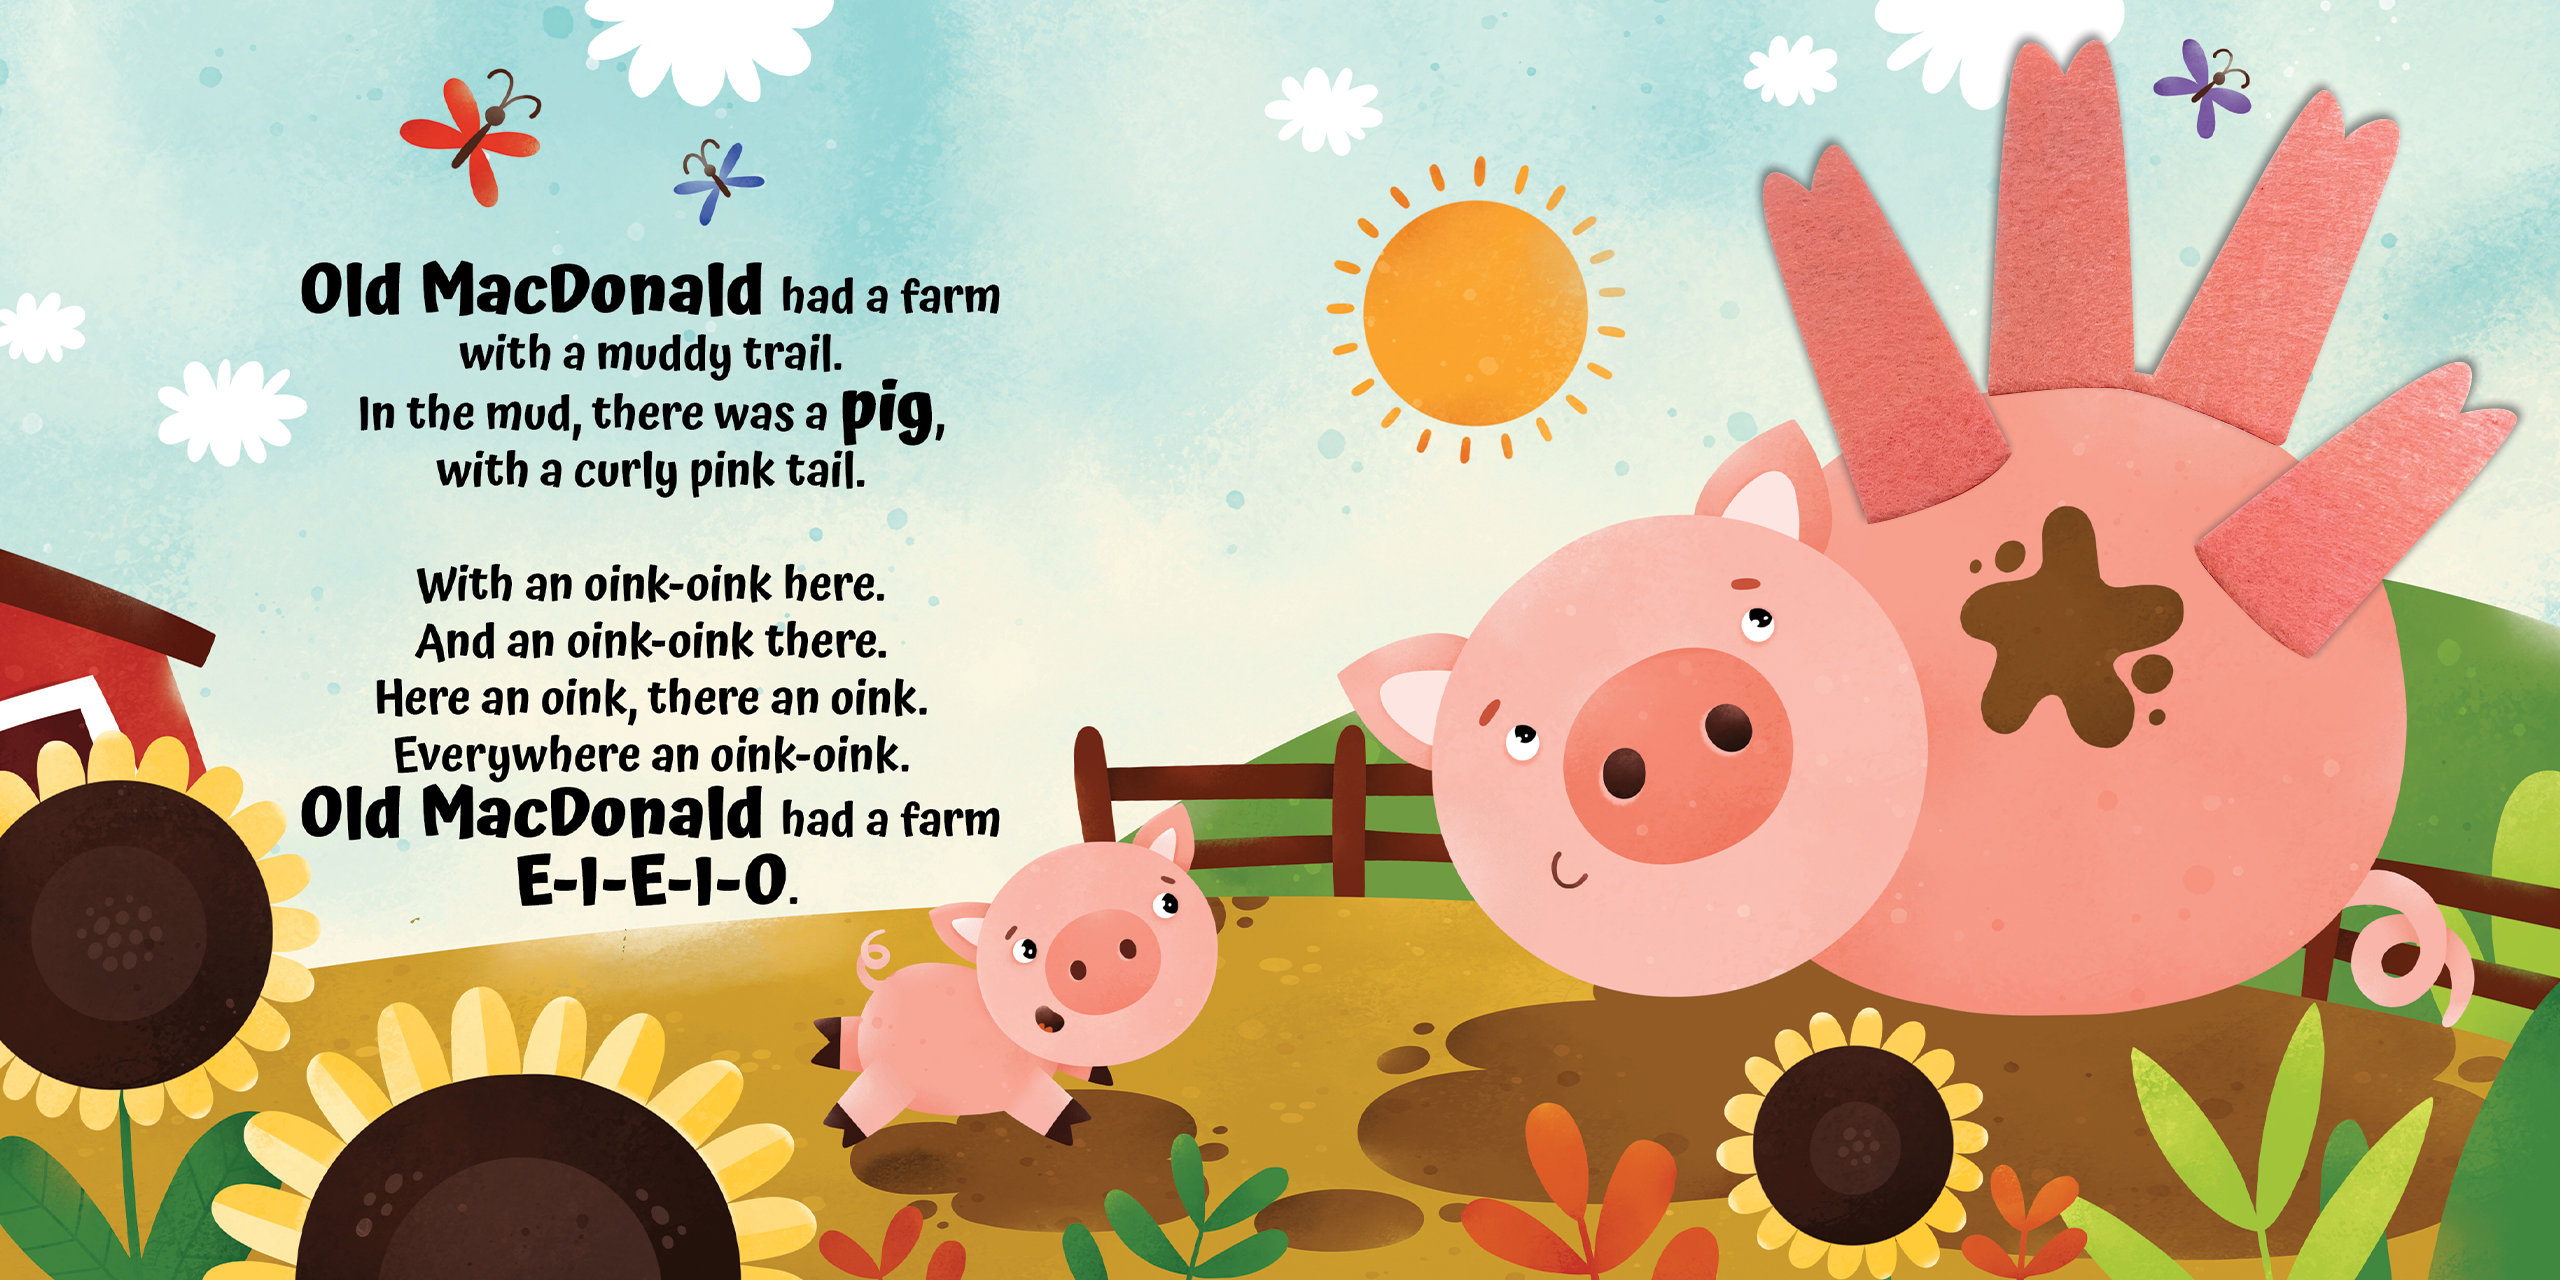 Little Hippo Books - Old MacDonald Had a Farm - Children's Sensory Board Book with Multiple Touch and Feel Felt Legs and More